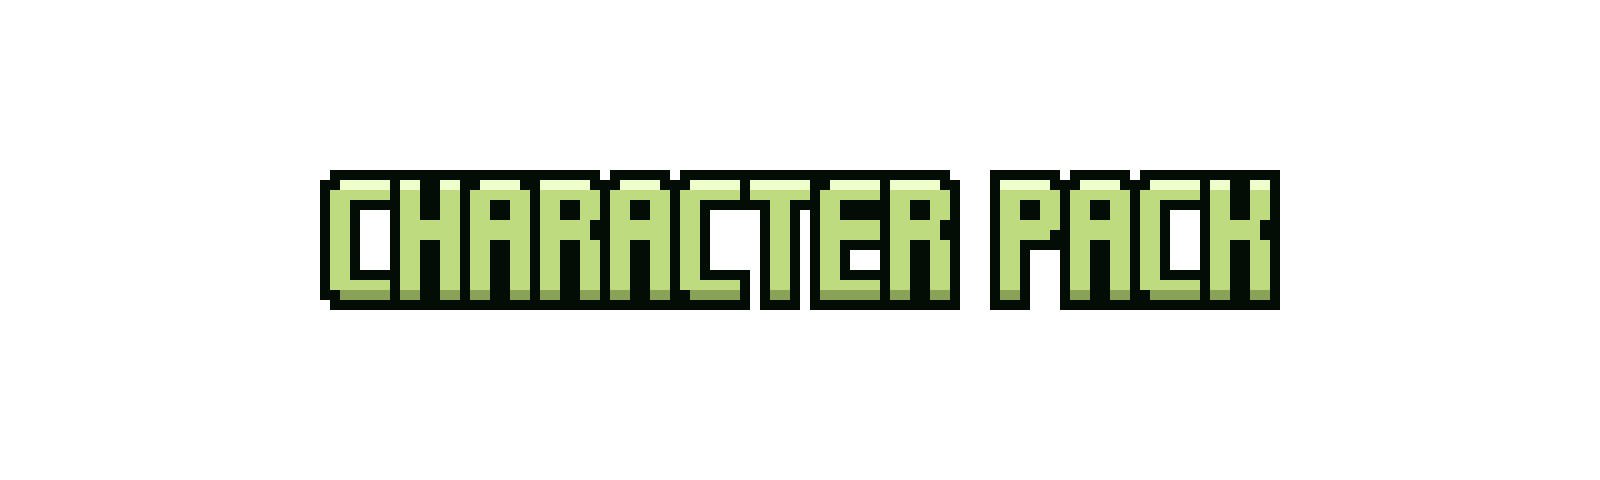 RPG Character Pack